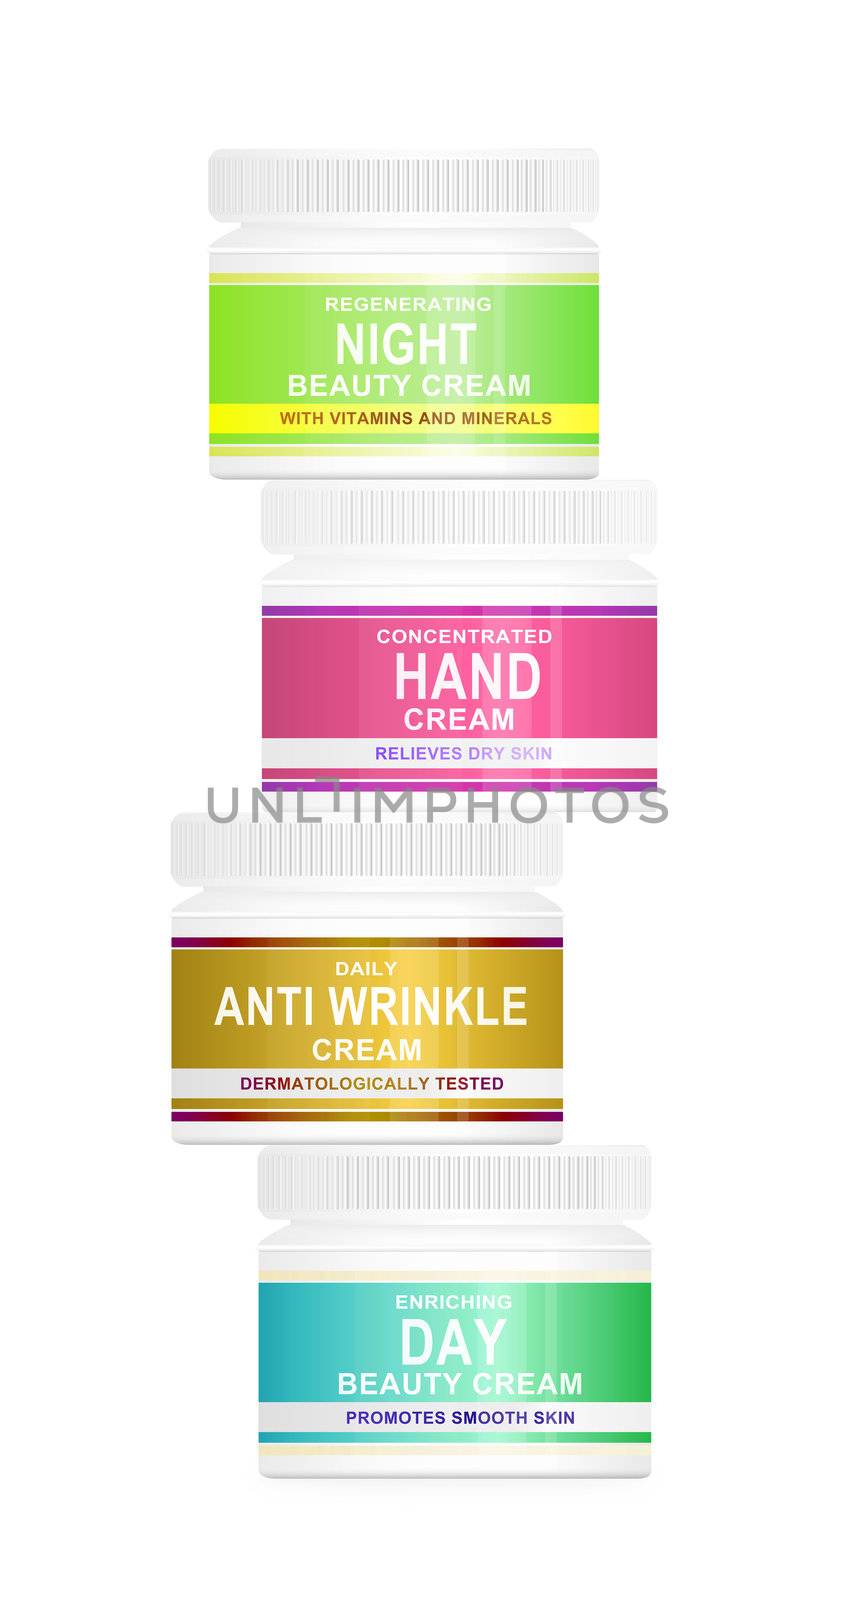 Illustration depicting four skin care product containers arranged vertically over white.